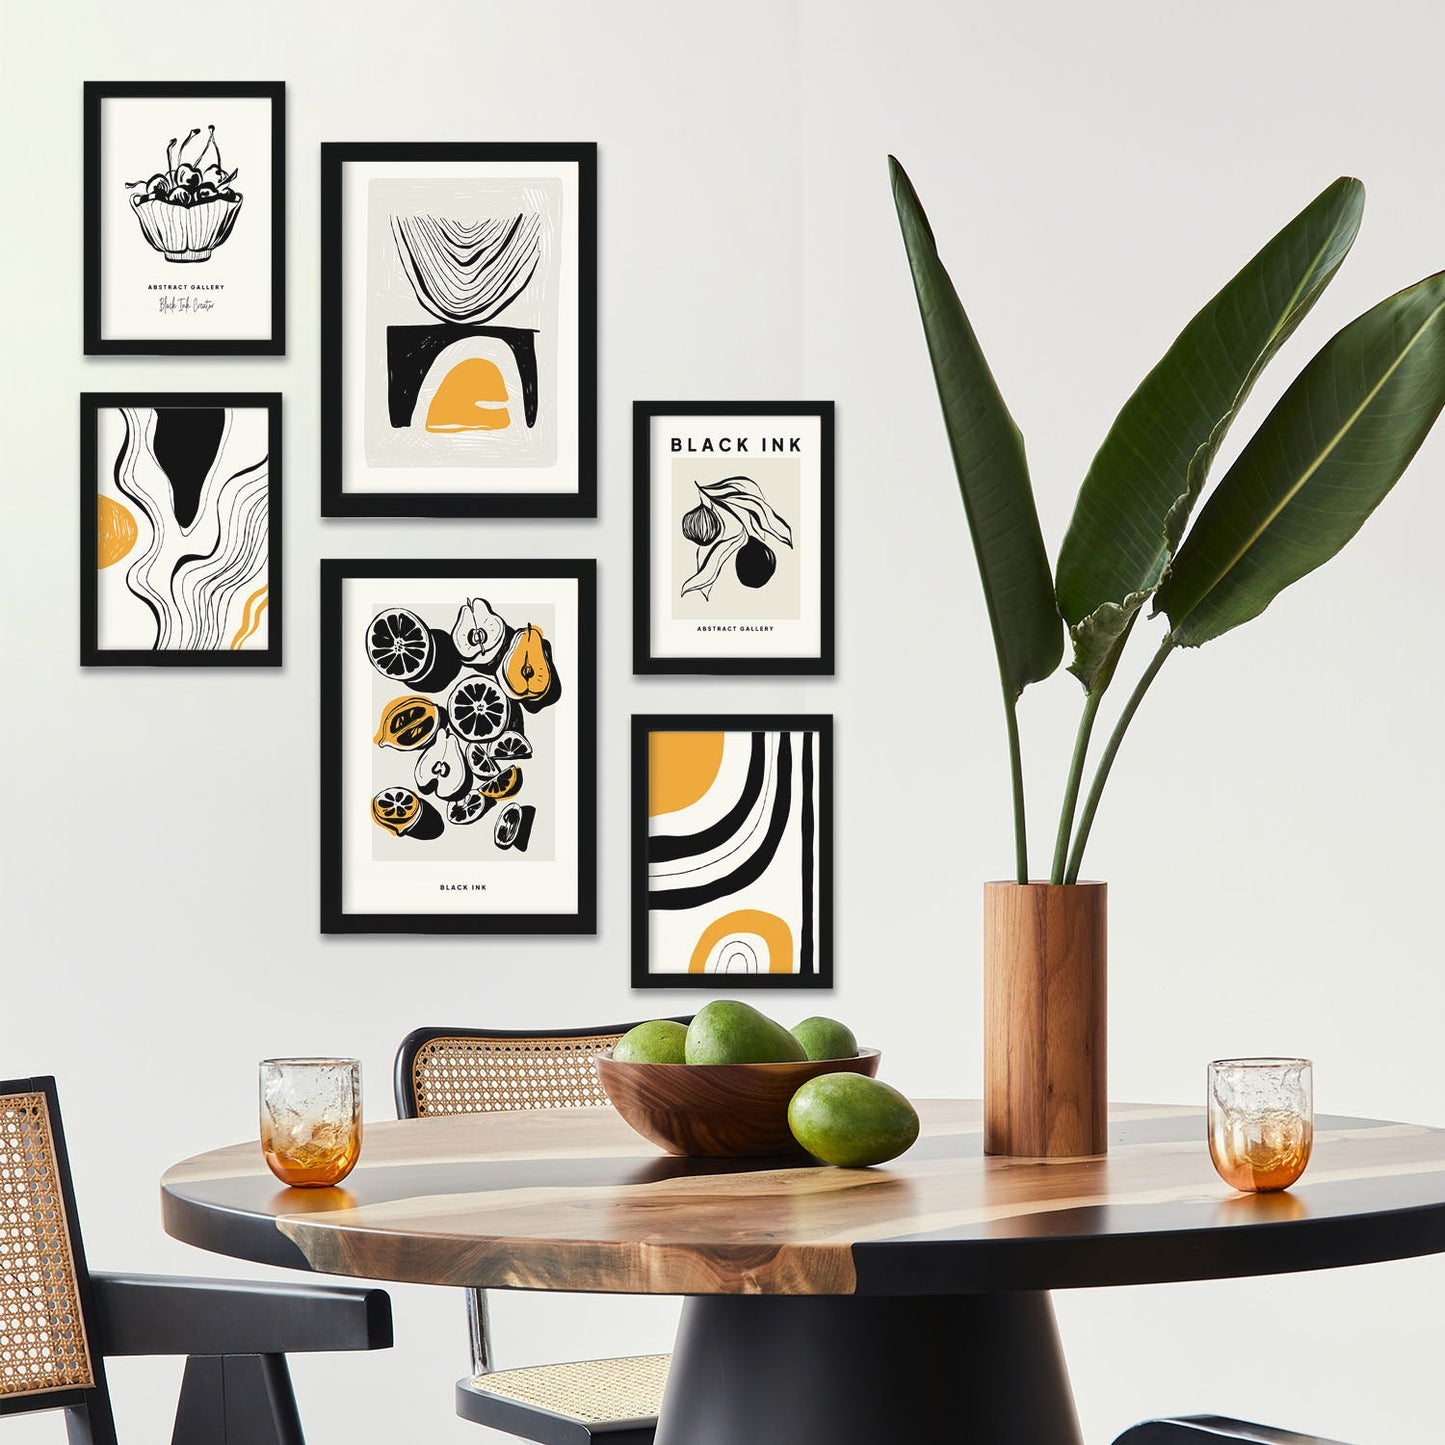 Thick Black Ink Posters. Fruits. Artistic and Abstract Aesthetic-Artwork-Nacnic-Nacnic Estudio SL